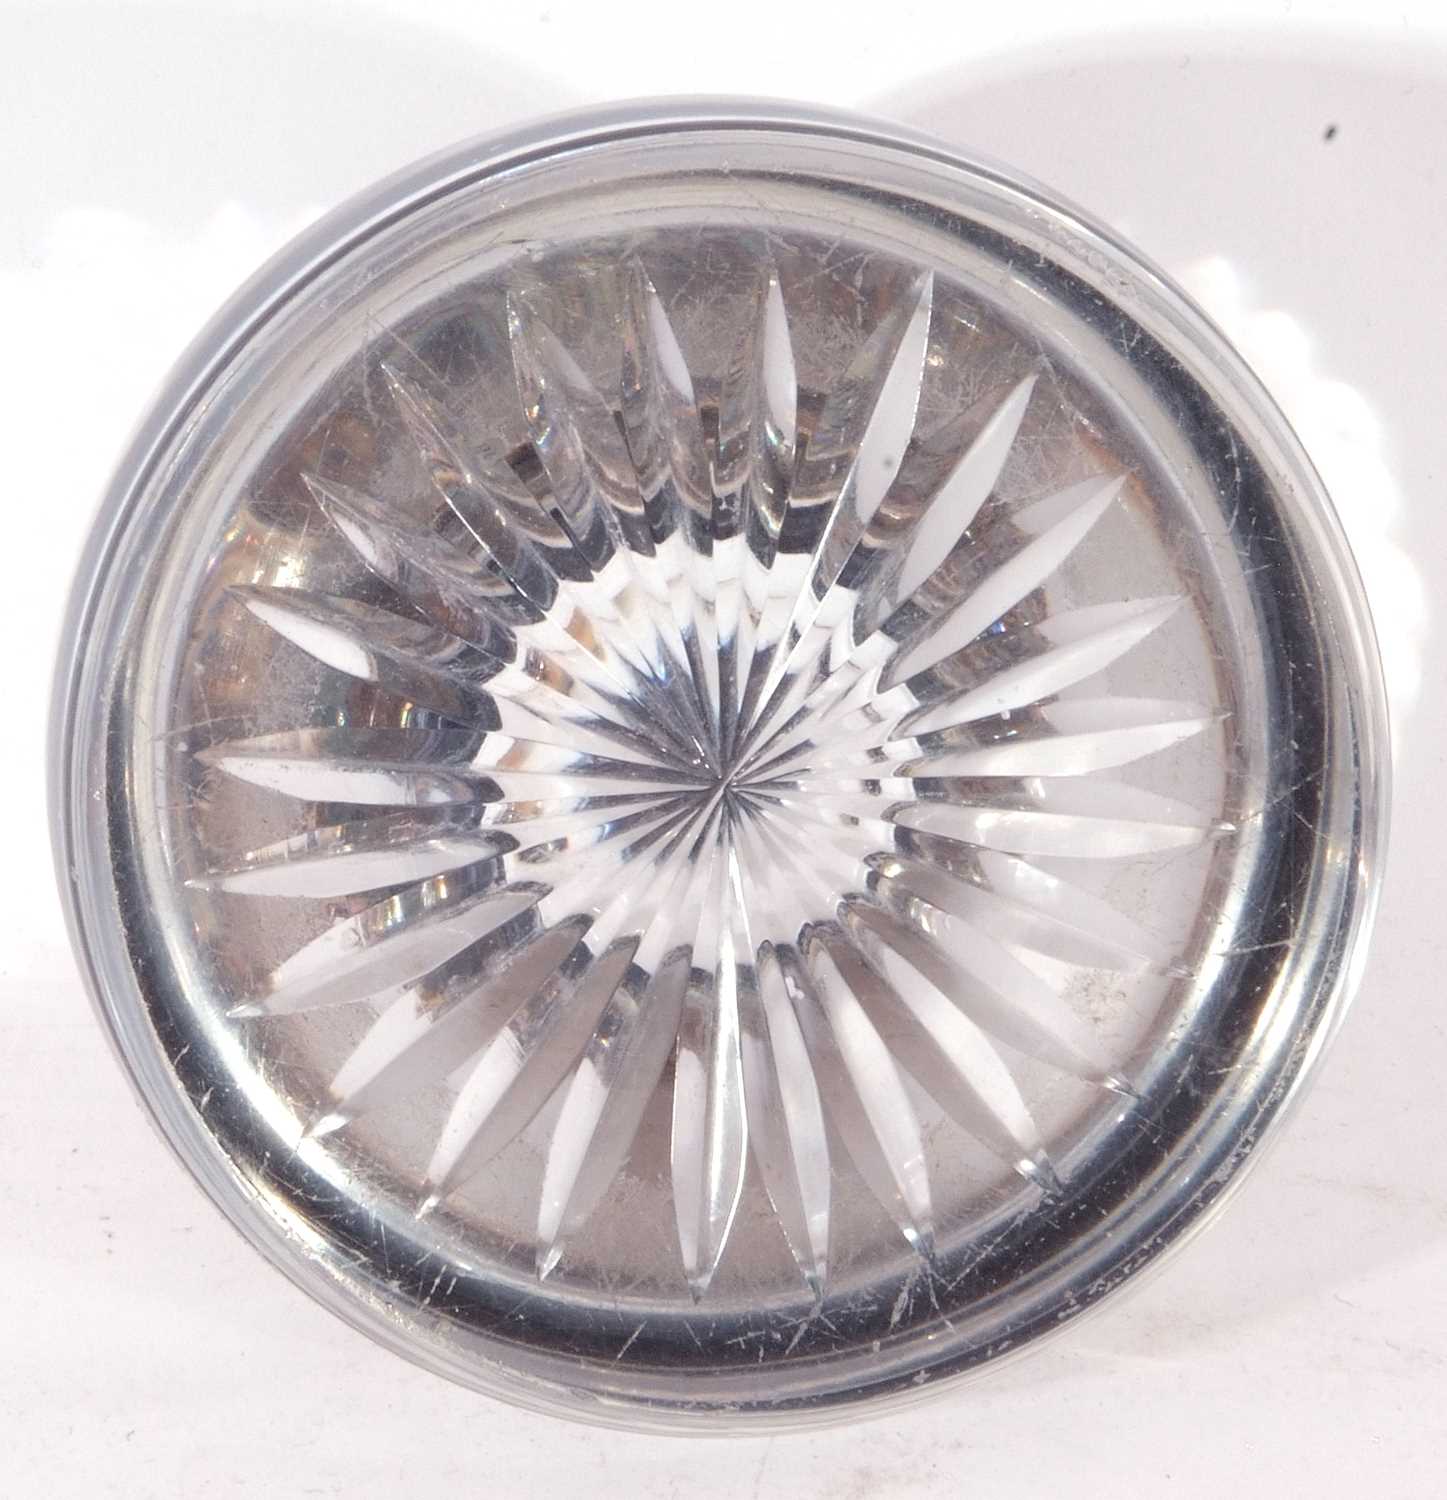 Circular clear glass inkwell with star cut base, hinged silver lid with embossed floral and - Image 4 of 4